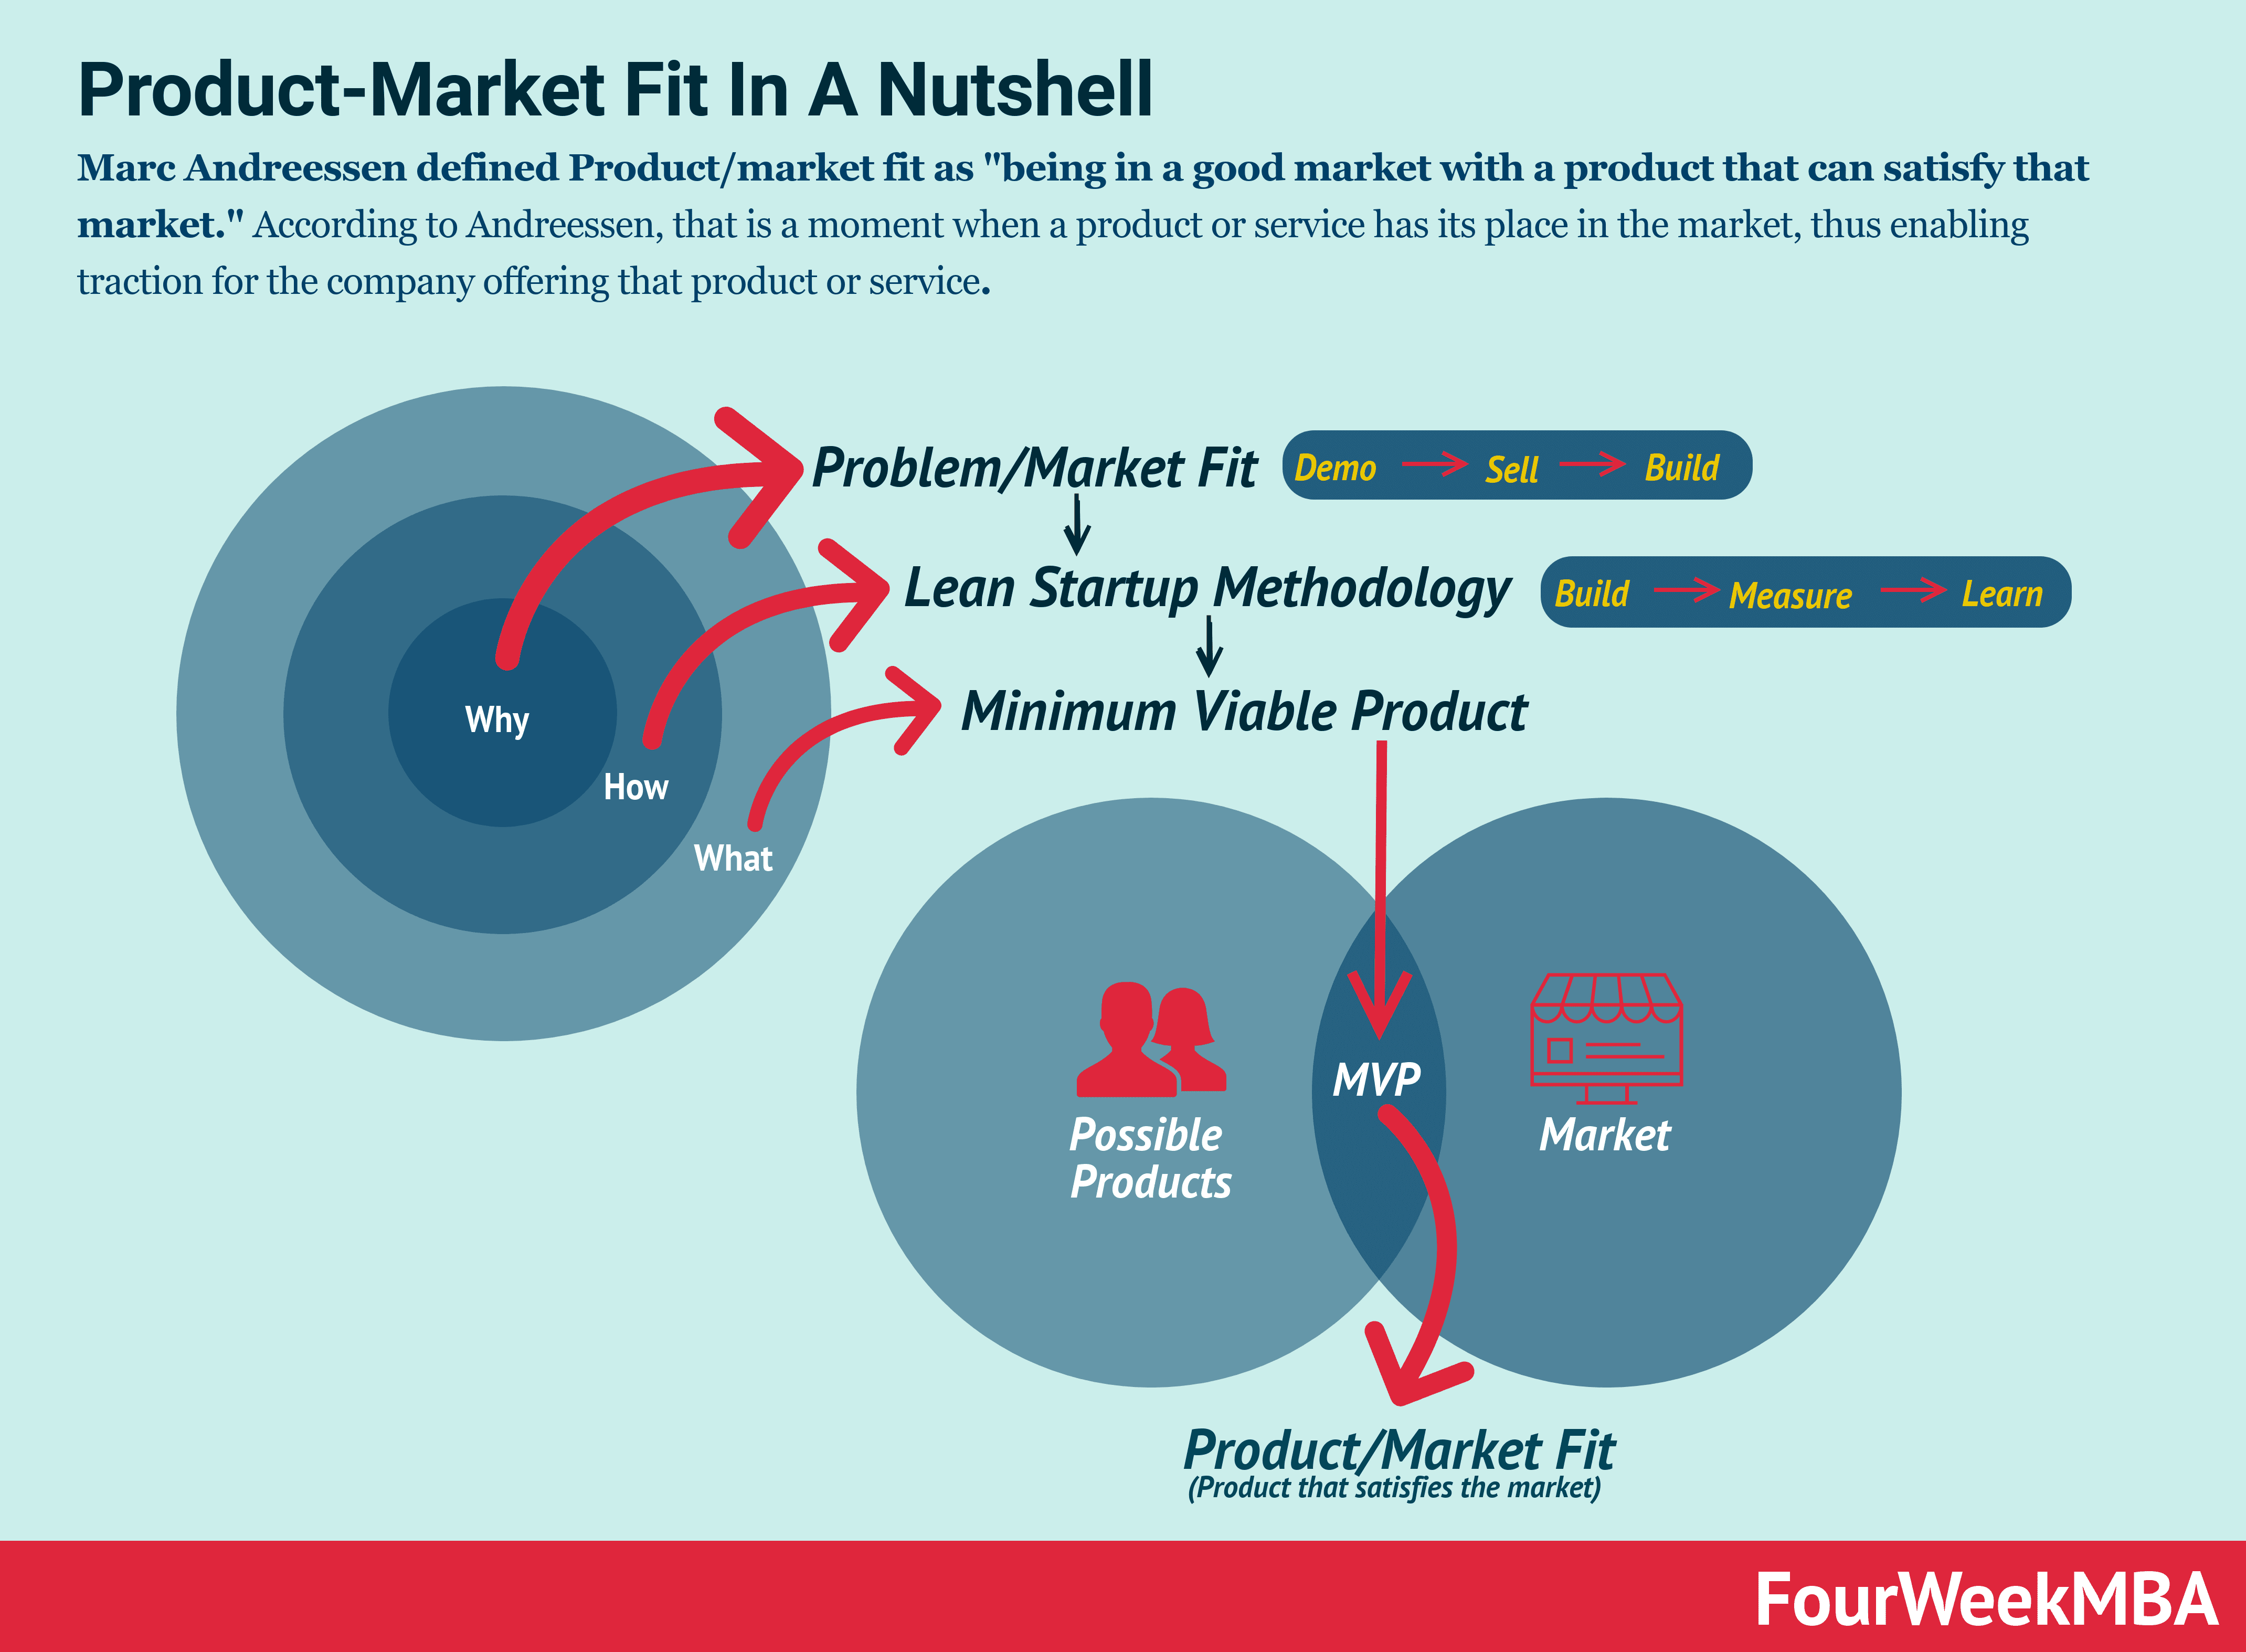 Product-Market Fit in a Nutshell